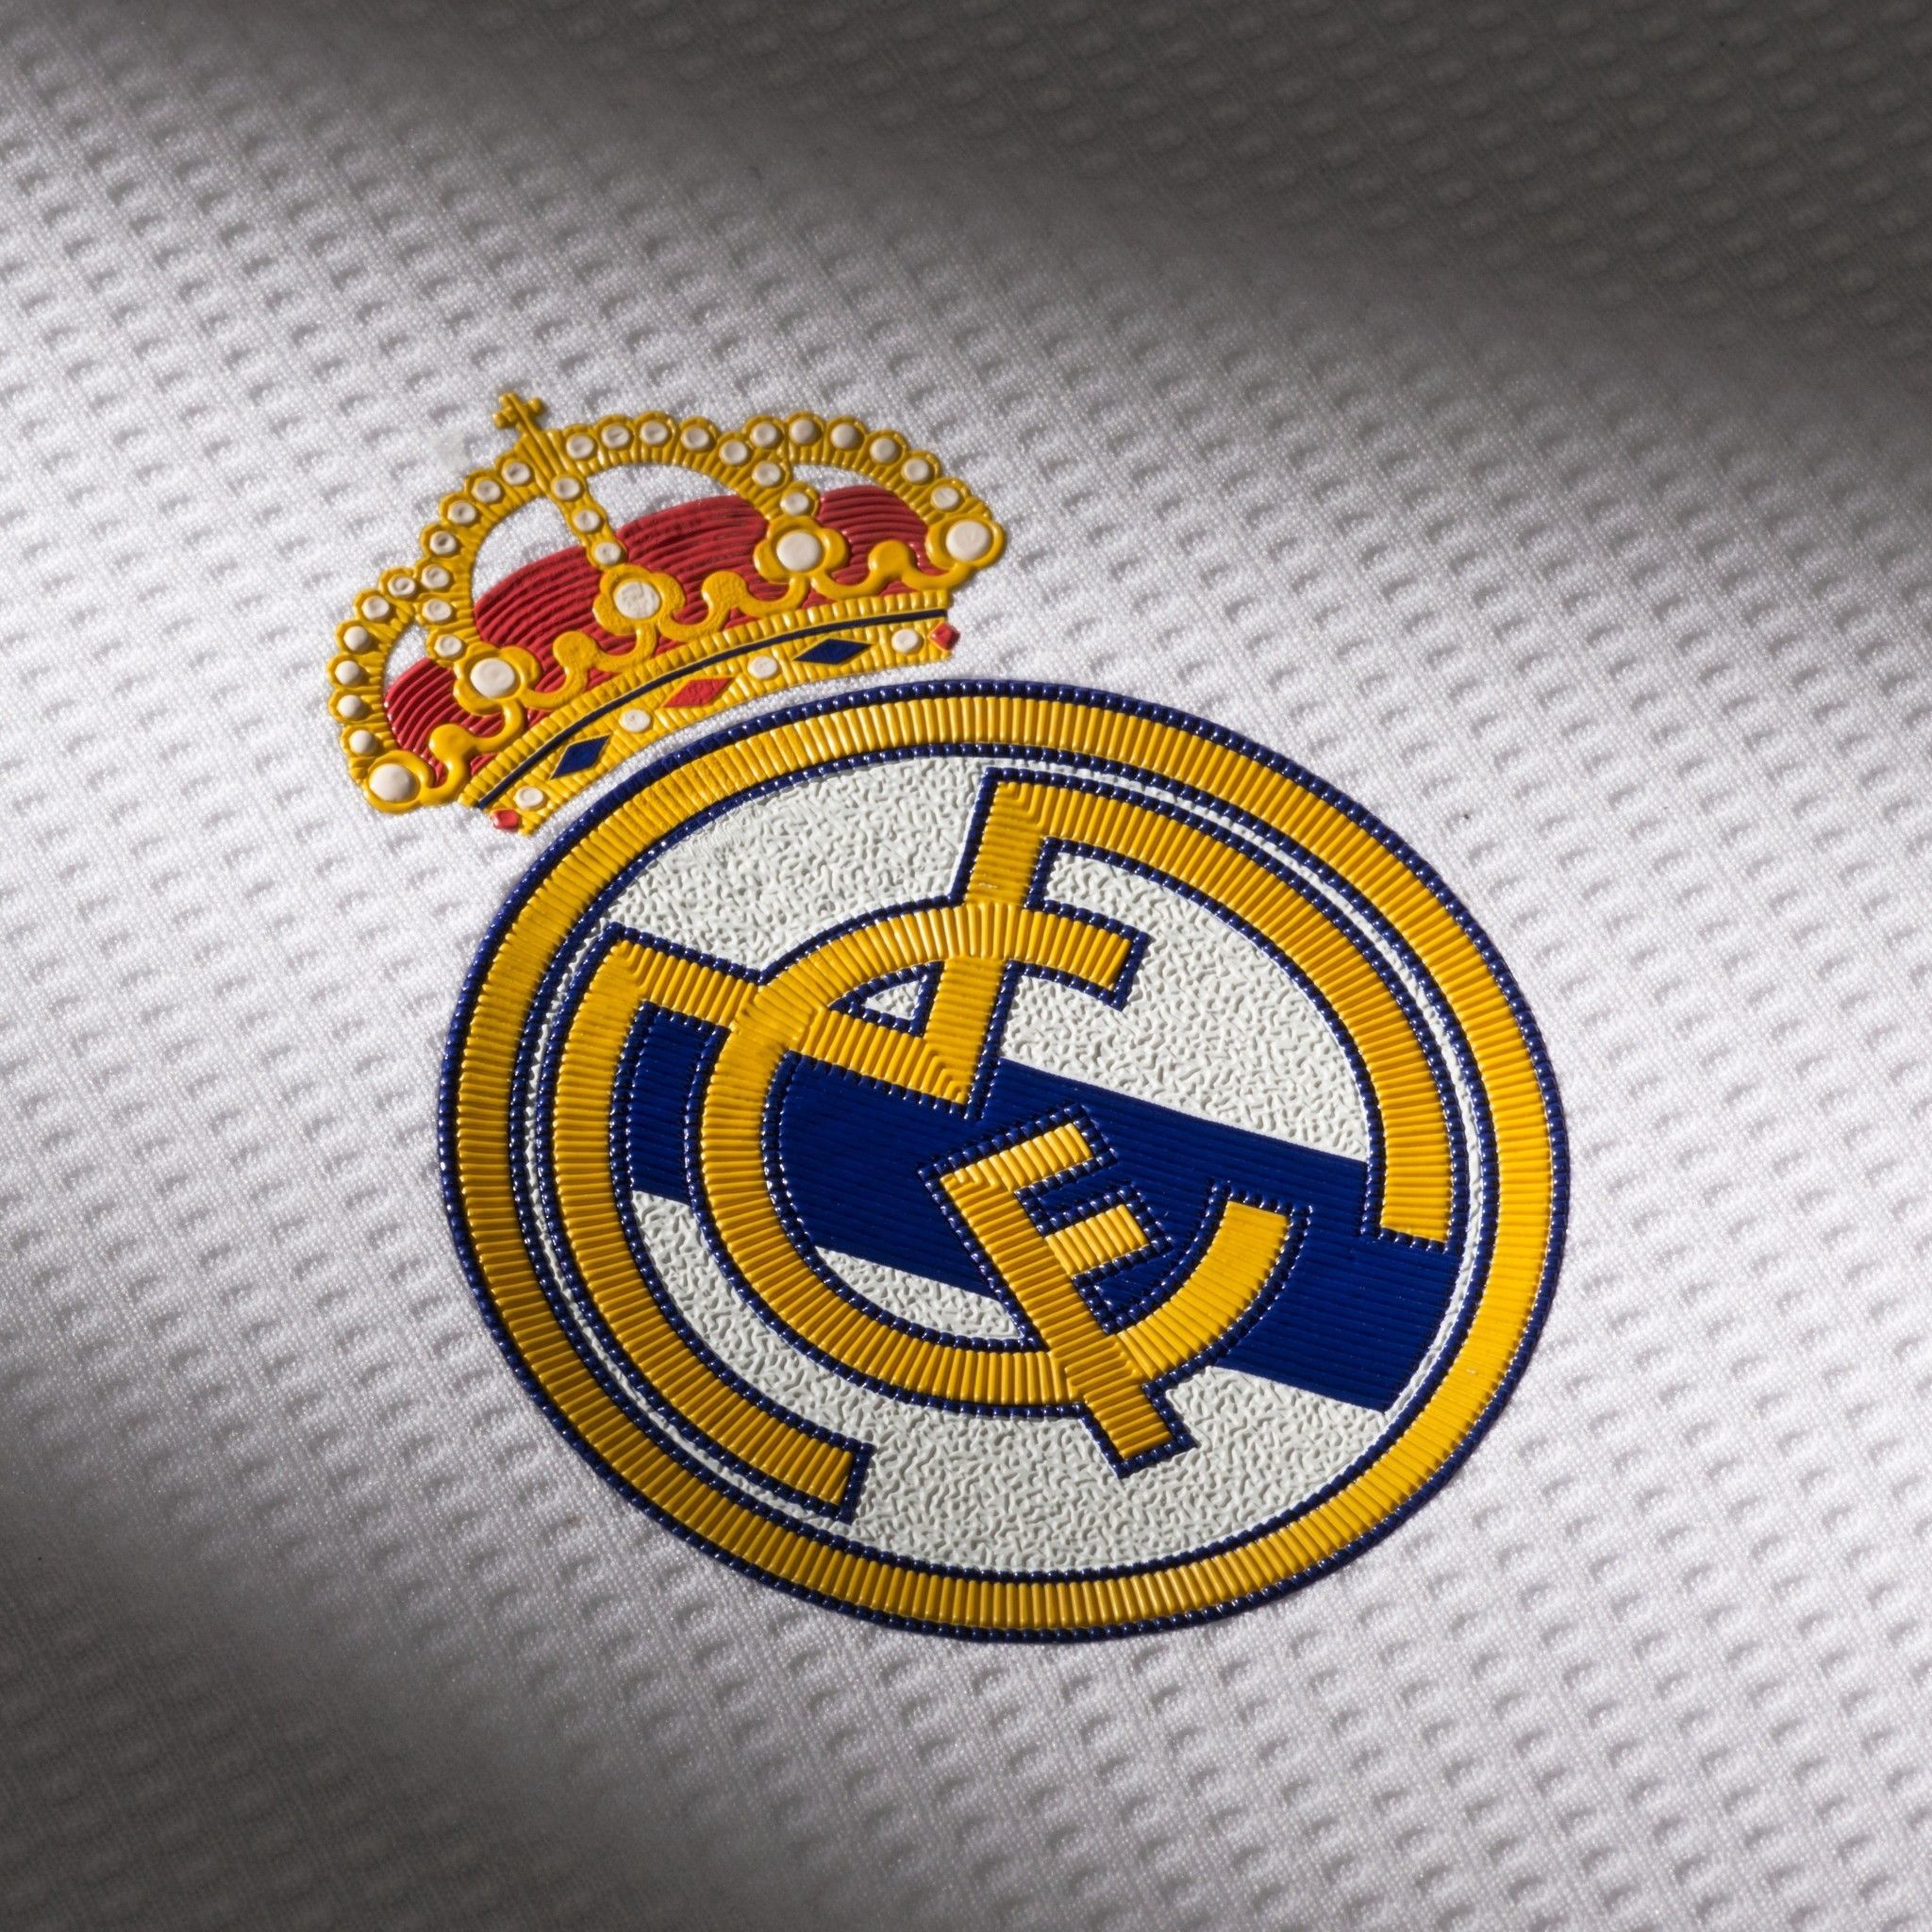 Real Madrid 3D Live Wallpaper Android Football. Real madrid wallpaper, Madrid wallpaper, Real madrid